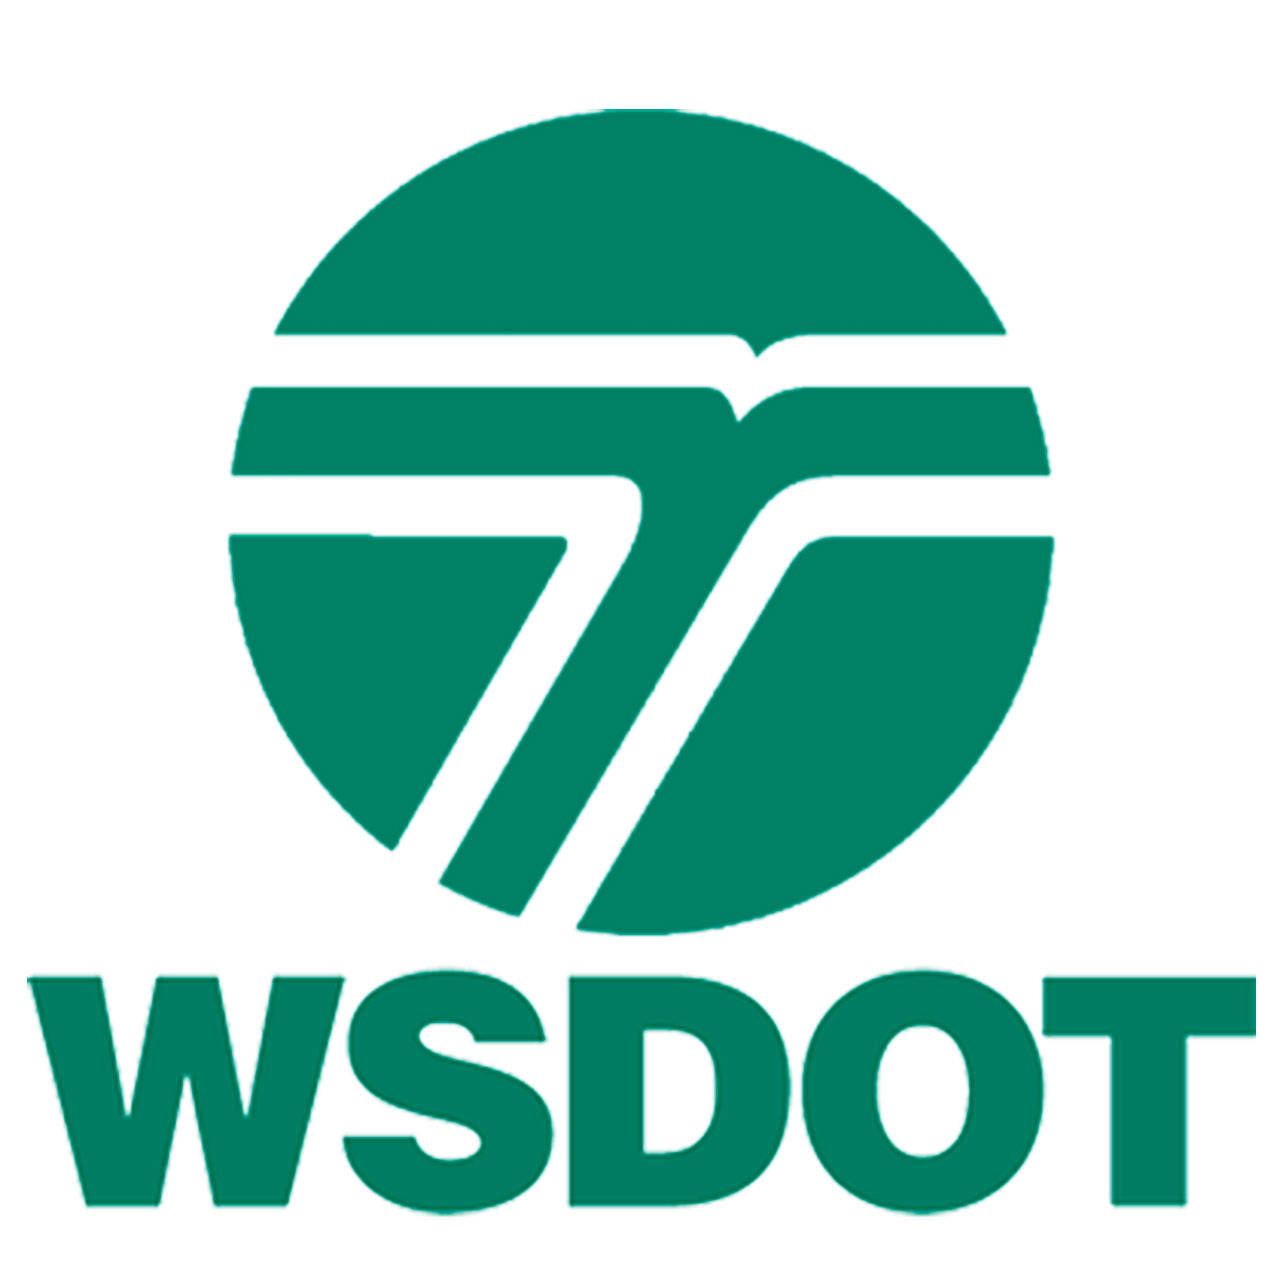 Comment on Washington State Department of Transportation projects